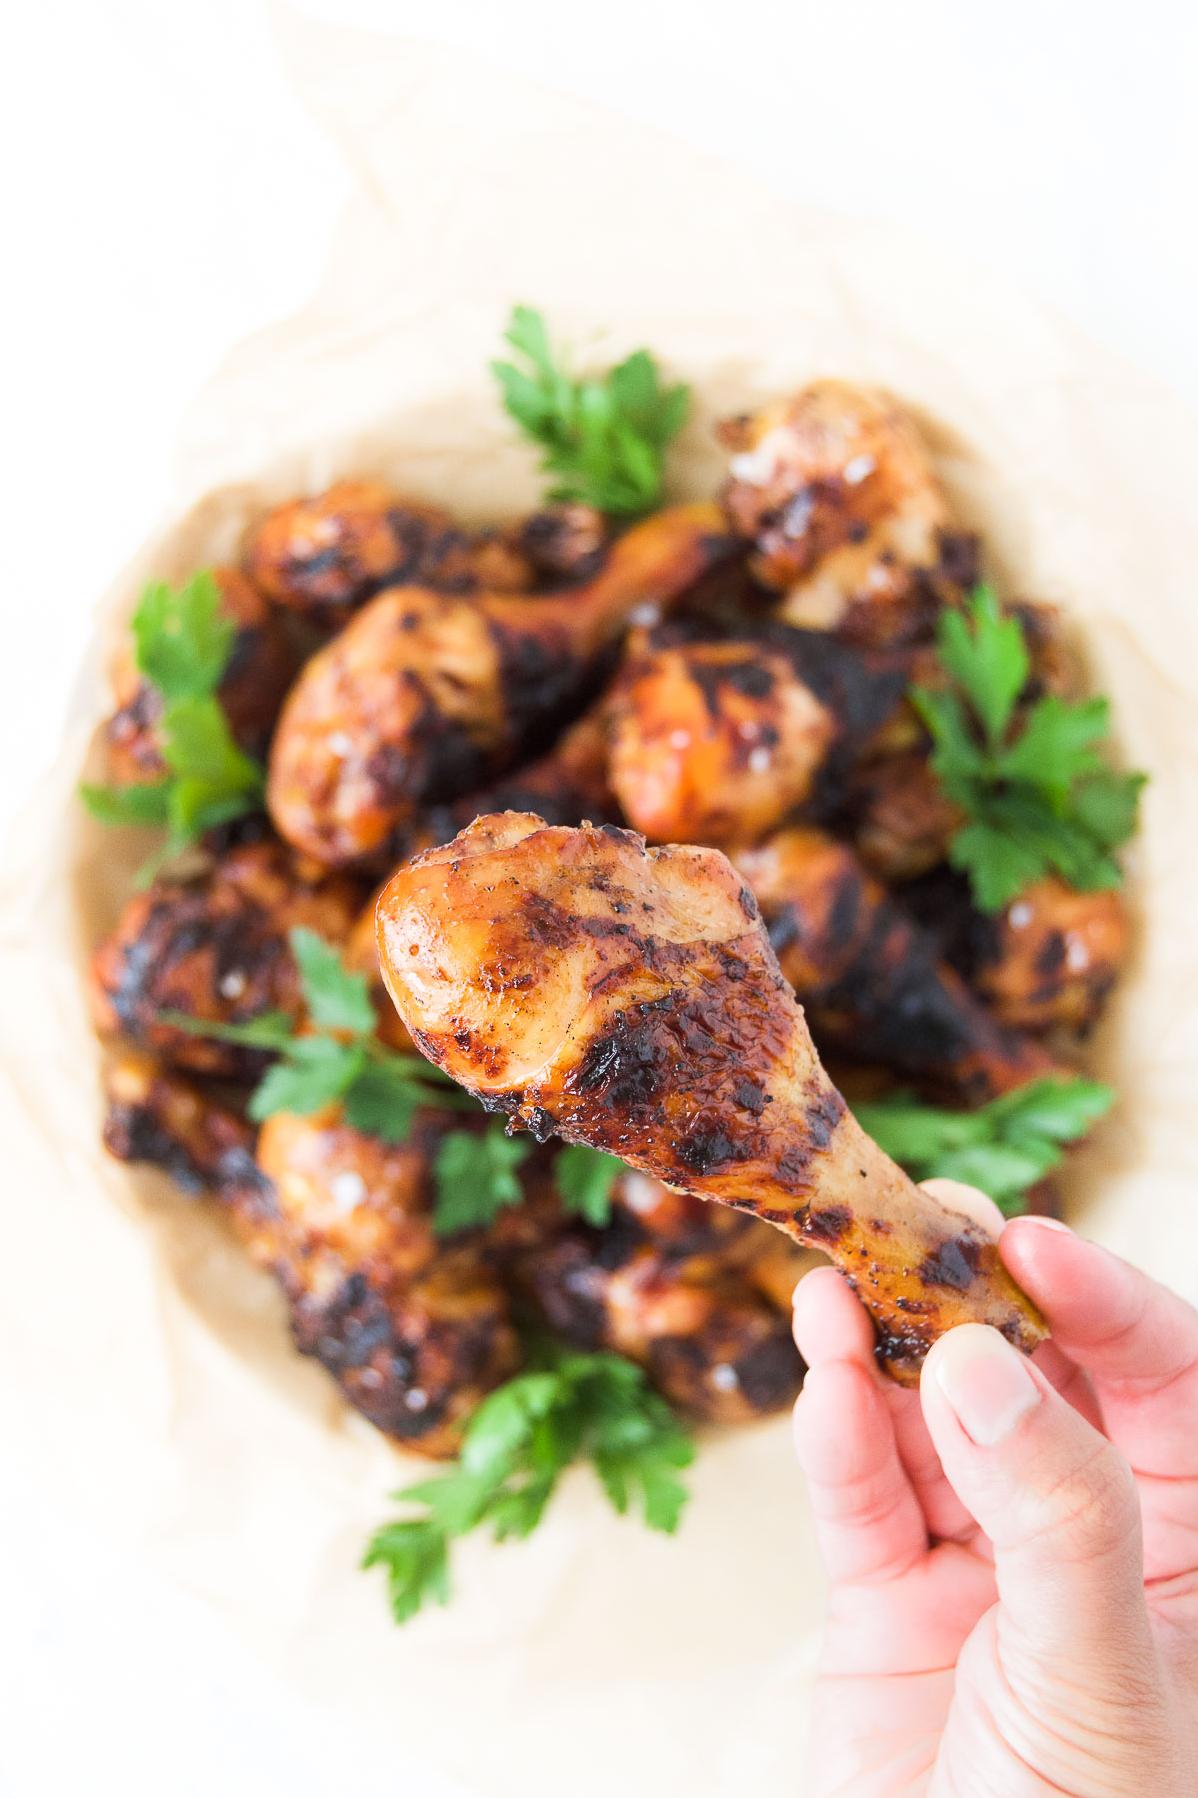  With a nice balance of sweetness and spice, this chicken will leave your taste buds dancing.